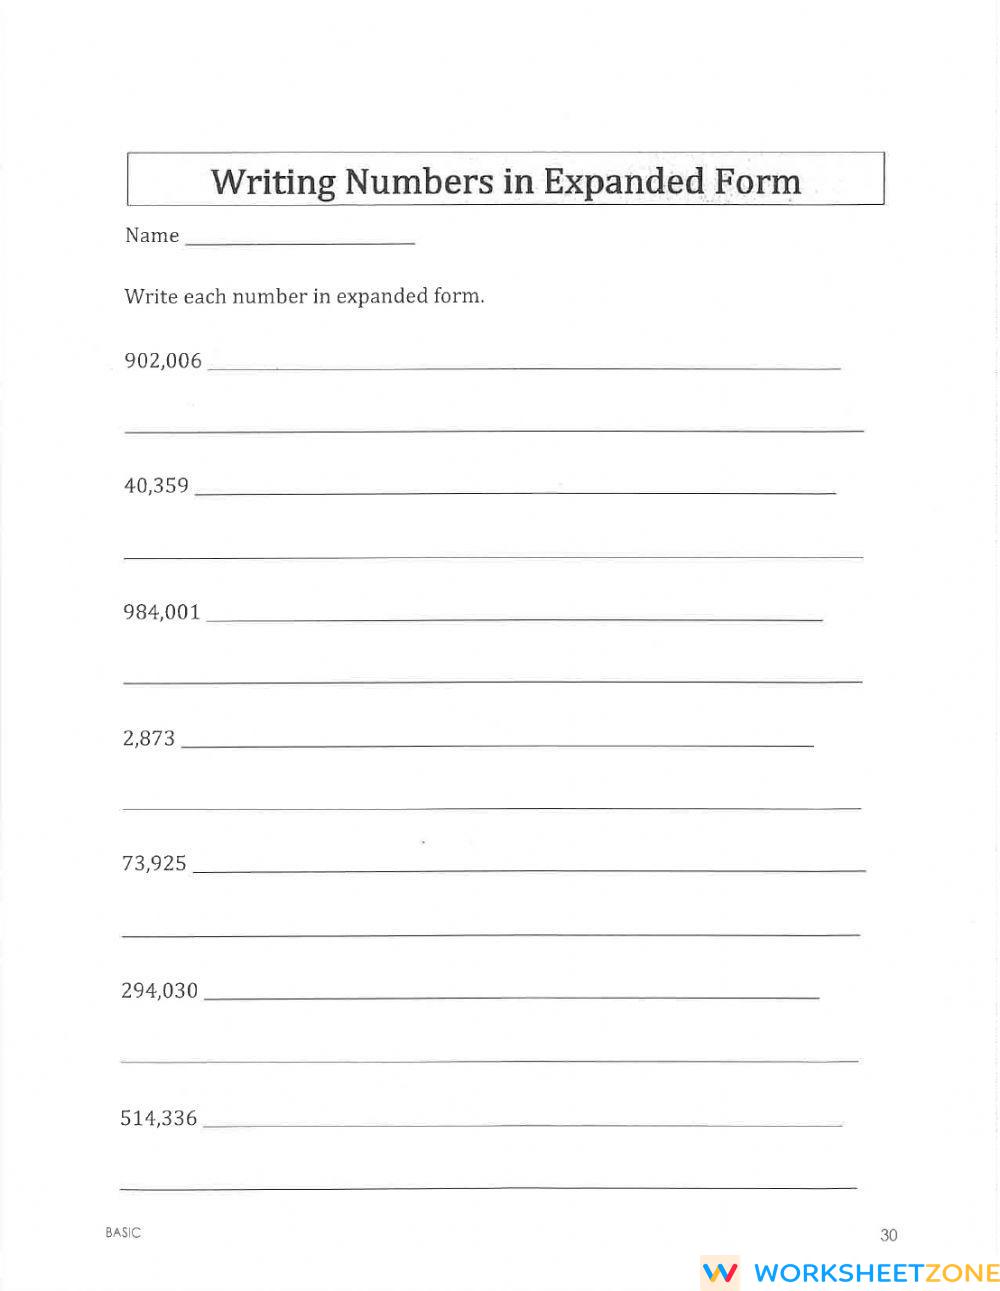 writing-numbers-in-expanded-form-worksheet-zone